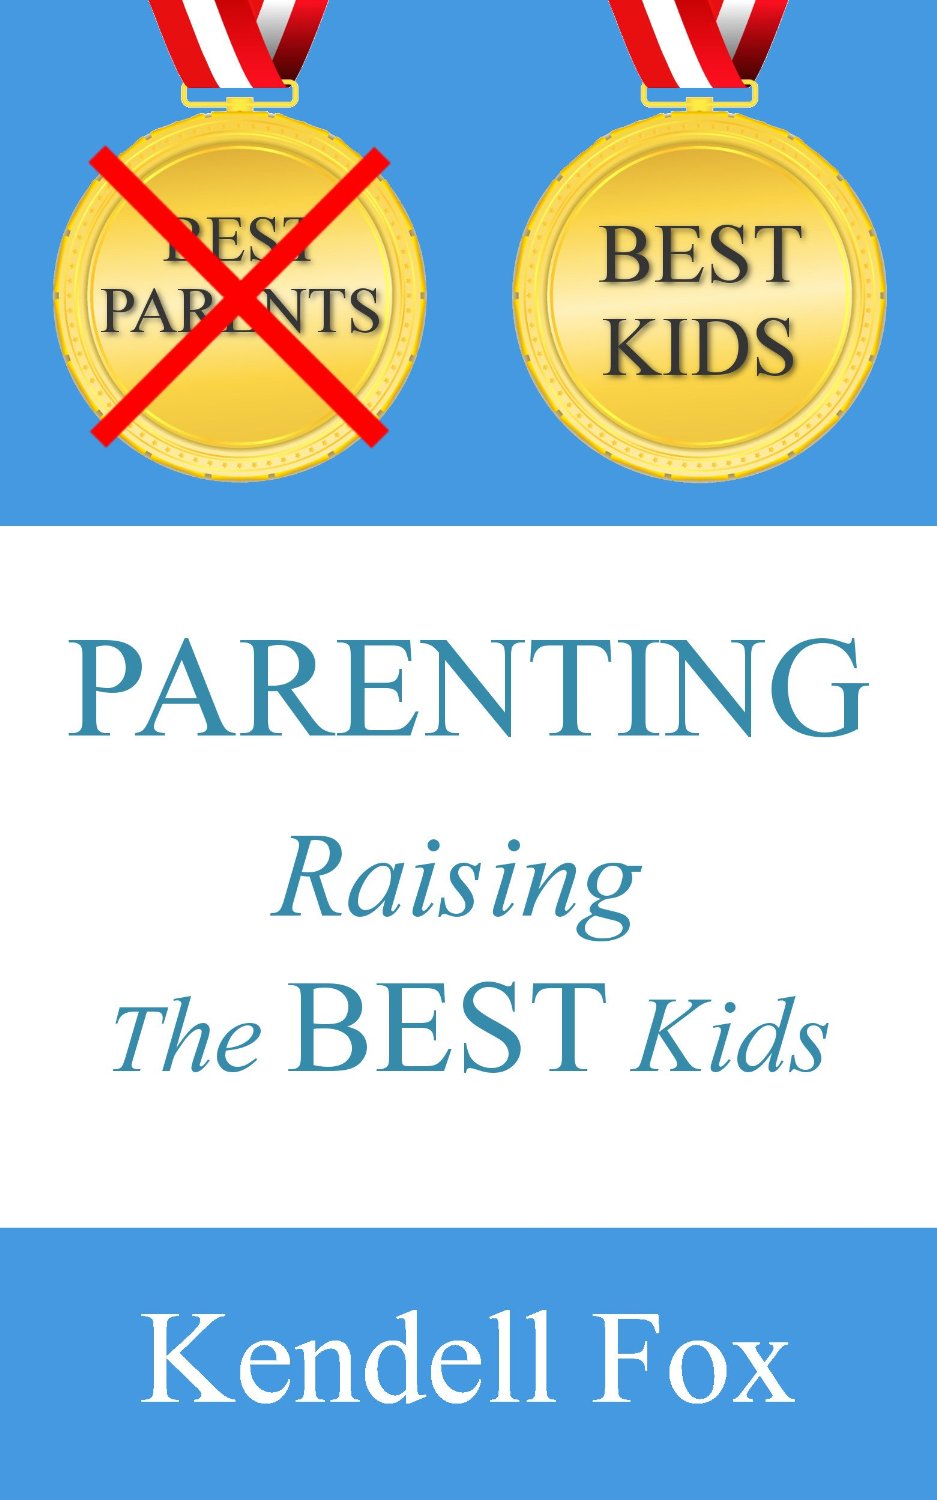 Parenting: Raising The Best Kids by Kendell Fox